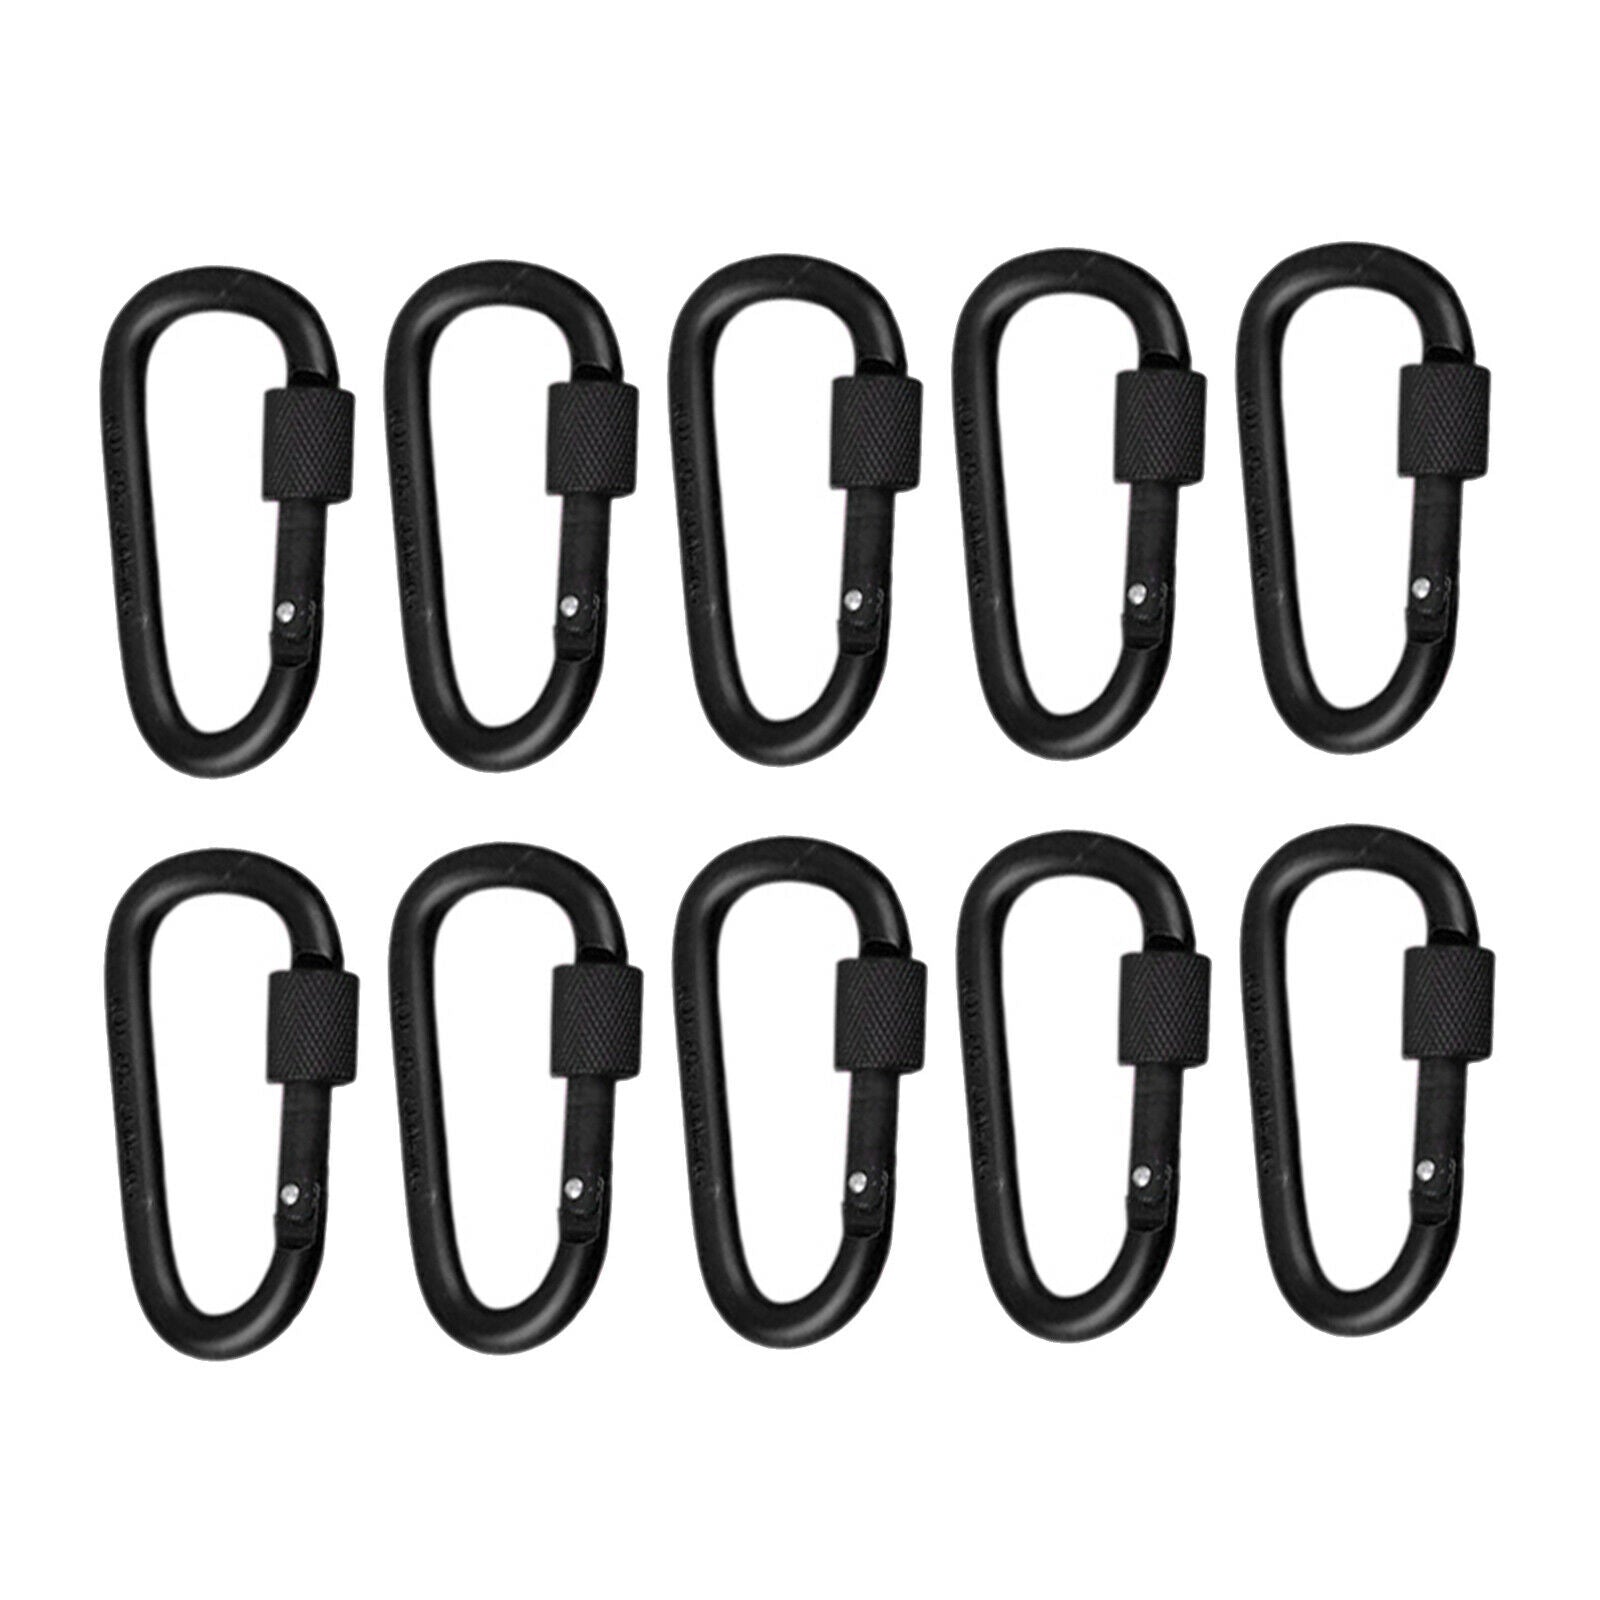 10PCS Small Anti-Rust Carabiner Clips Camping Keychain D-Ring Fishing Clasp